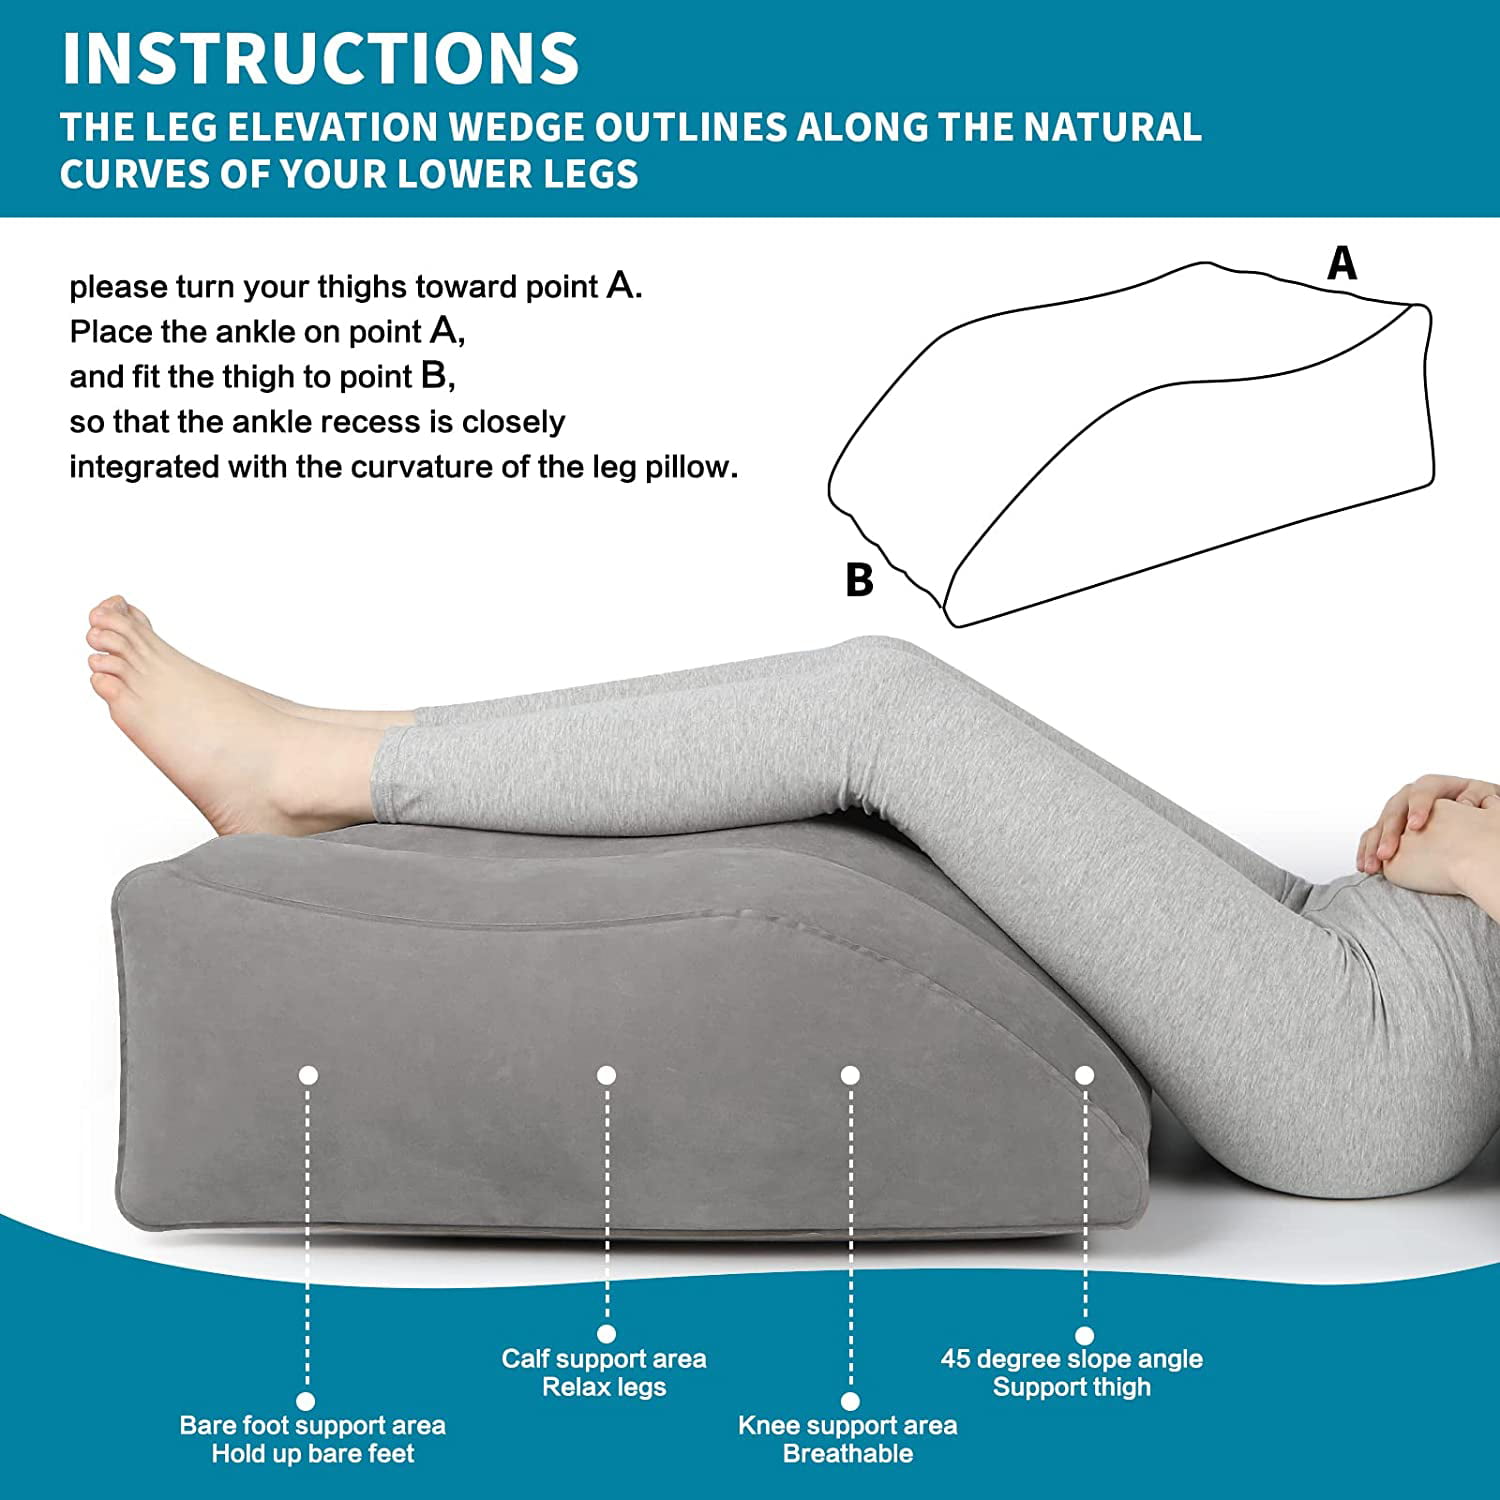 QISHFEN Leg Elevation Pillow Inflatable, Leg Rest Pillow Bed Wedge Post Surgery Elevated Wedge Pillows for Sleeping,Hip and Knee Pain Relief, Foot